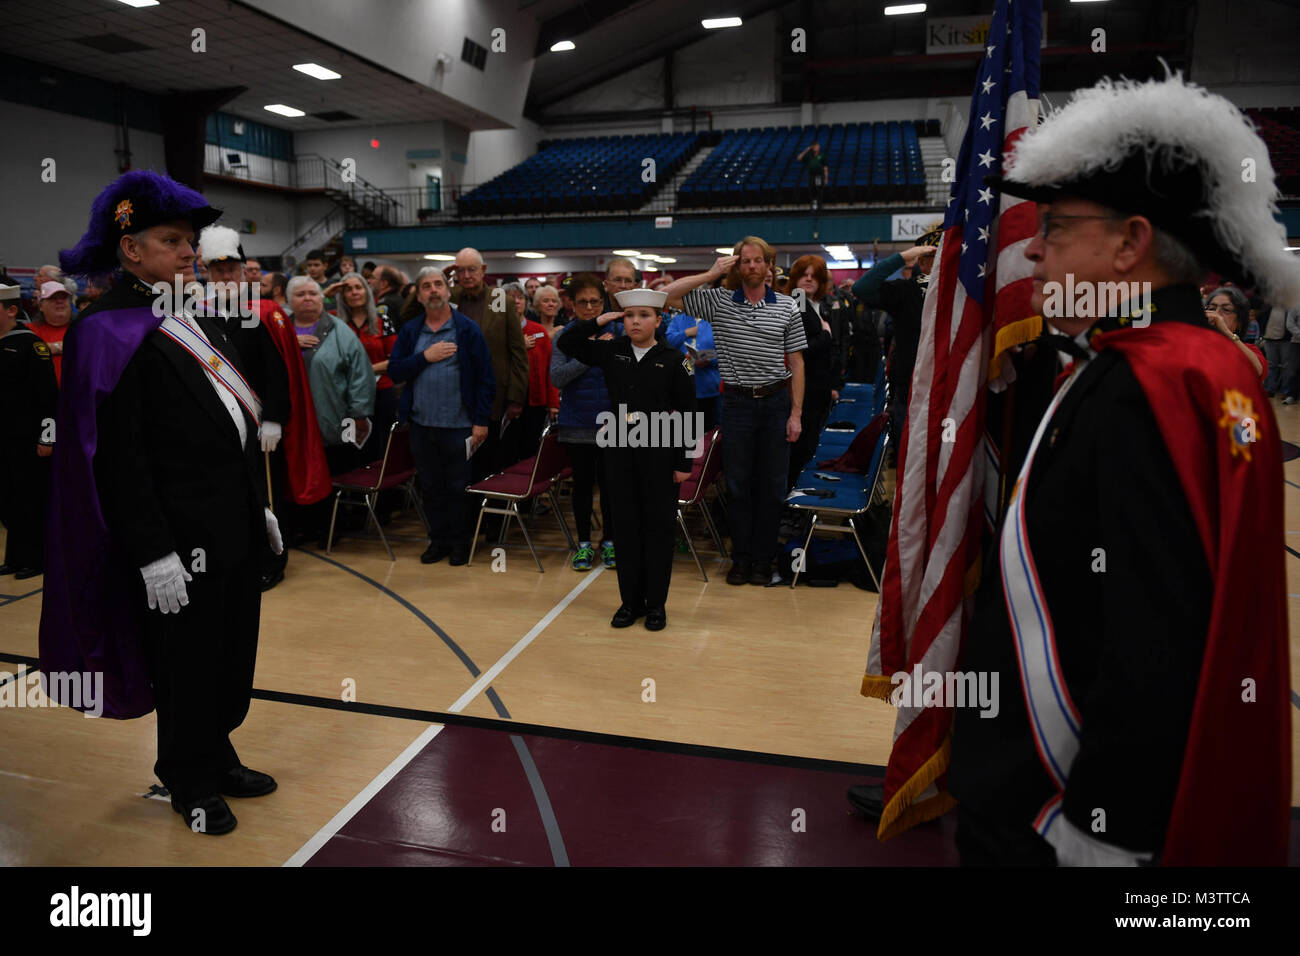 161111-N-EC099-133 SILVERDALE, Wash. (Nov. 11, 2016) Members of the Knights of Columbus, Naval Sea Cadet Corps and Navy Jr. Reserve Officer Training Corps color guards parade the colors during the 2016 Veterans Day ceremony held in the Kitsap Sun Pavilion. The ceremony paid respect to service members both past and present and remembered those service members lost during the history of the United States. (U.S. Navy photo by Petty Officer 3rd Class Charles D. Gaddis IV/Released) 161111-N-EC099-133 by Naval Base Kitsap (NBK) Stock Photo